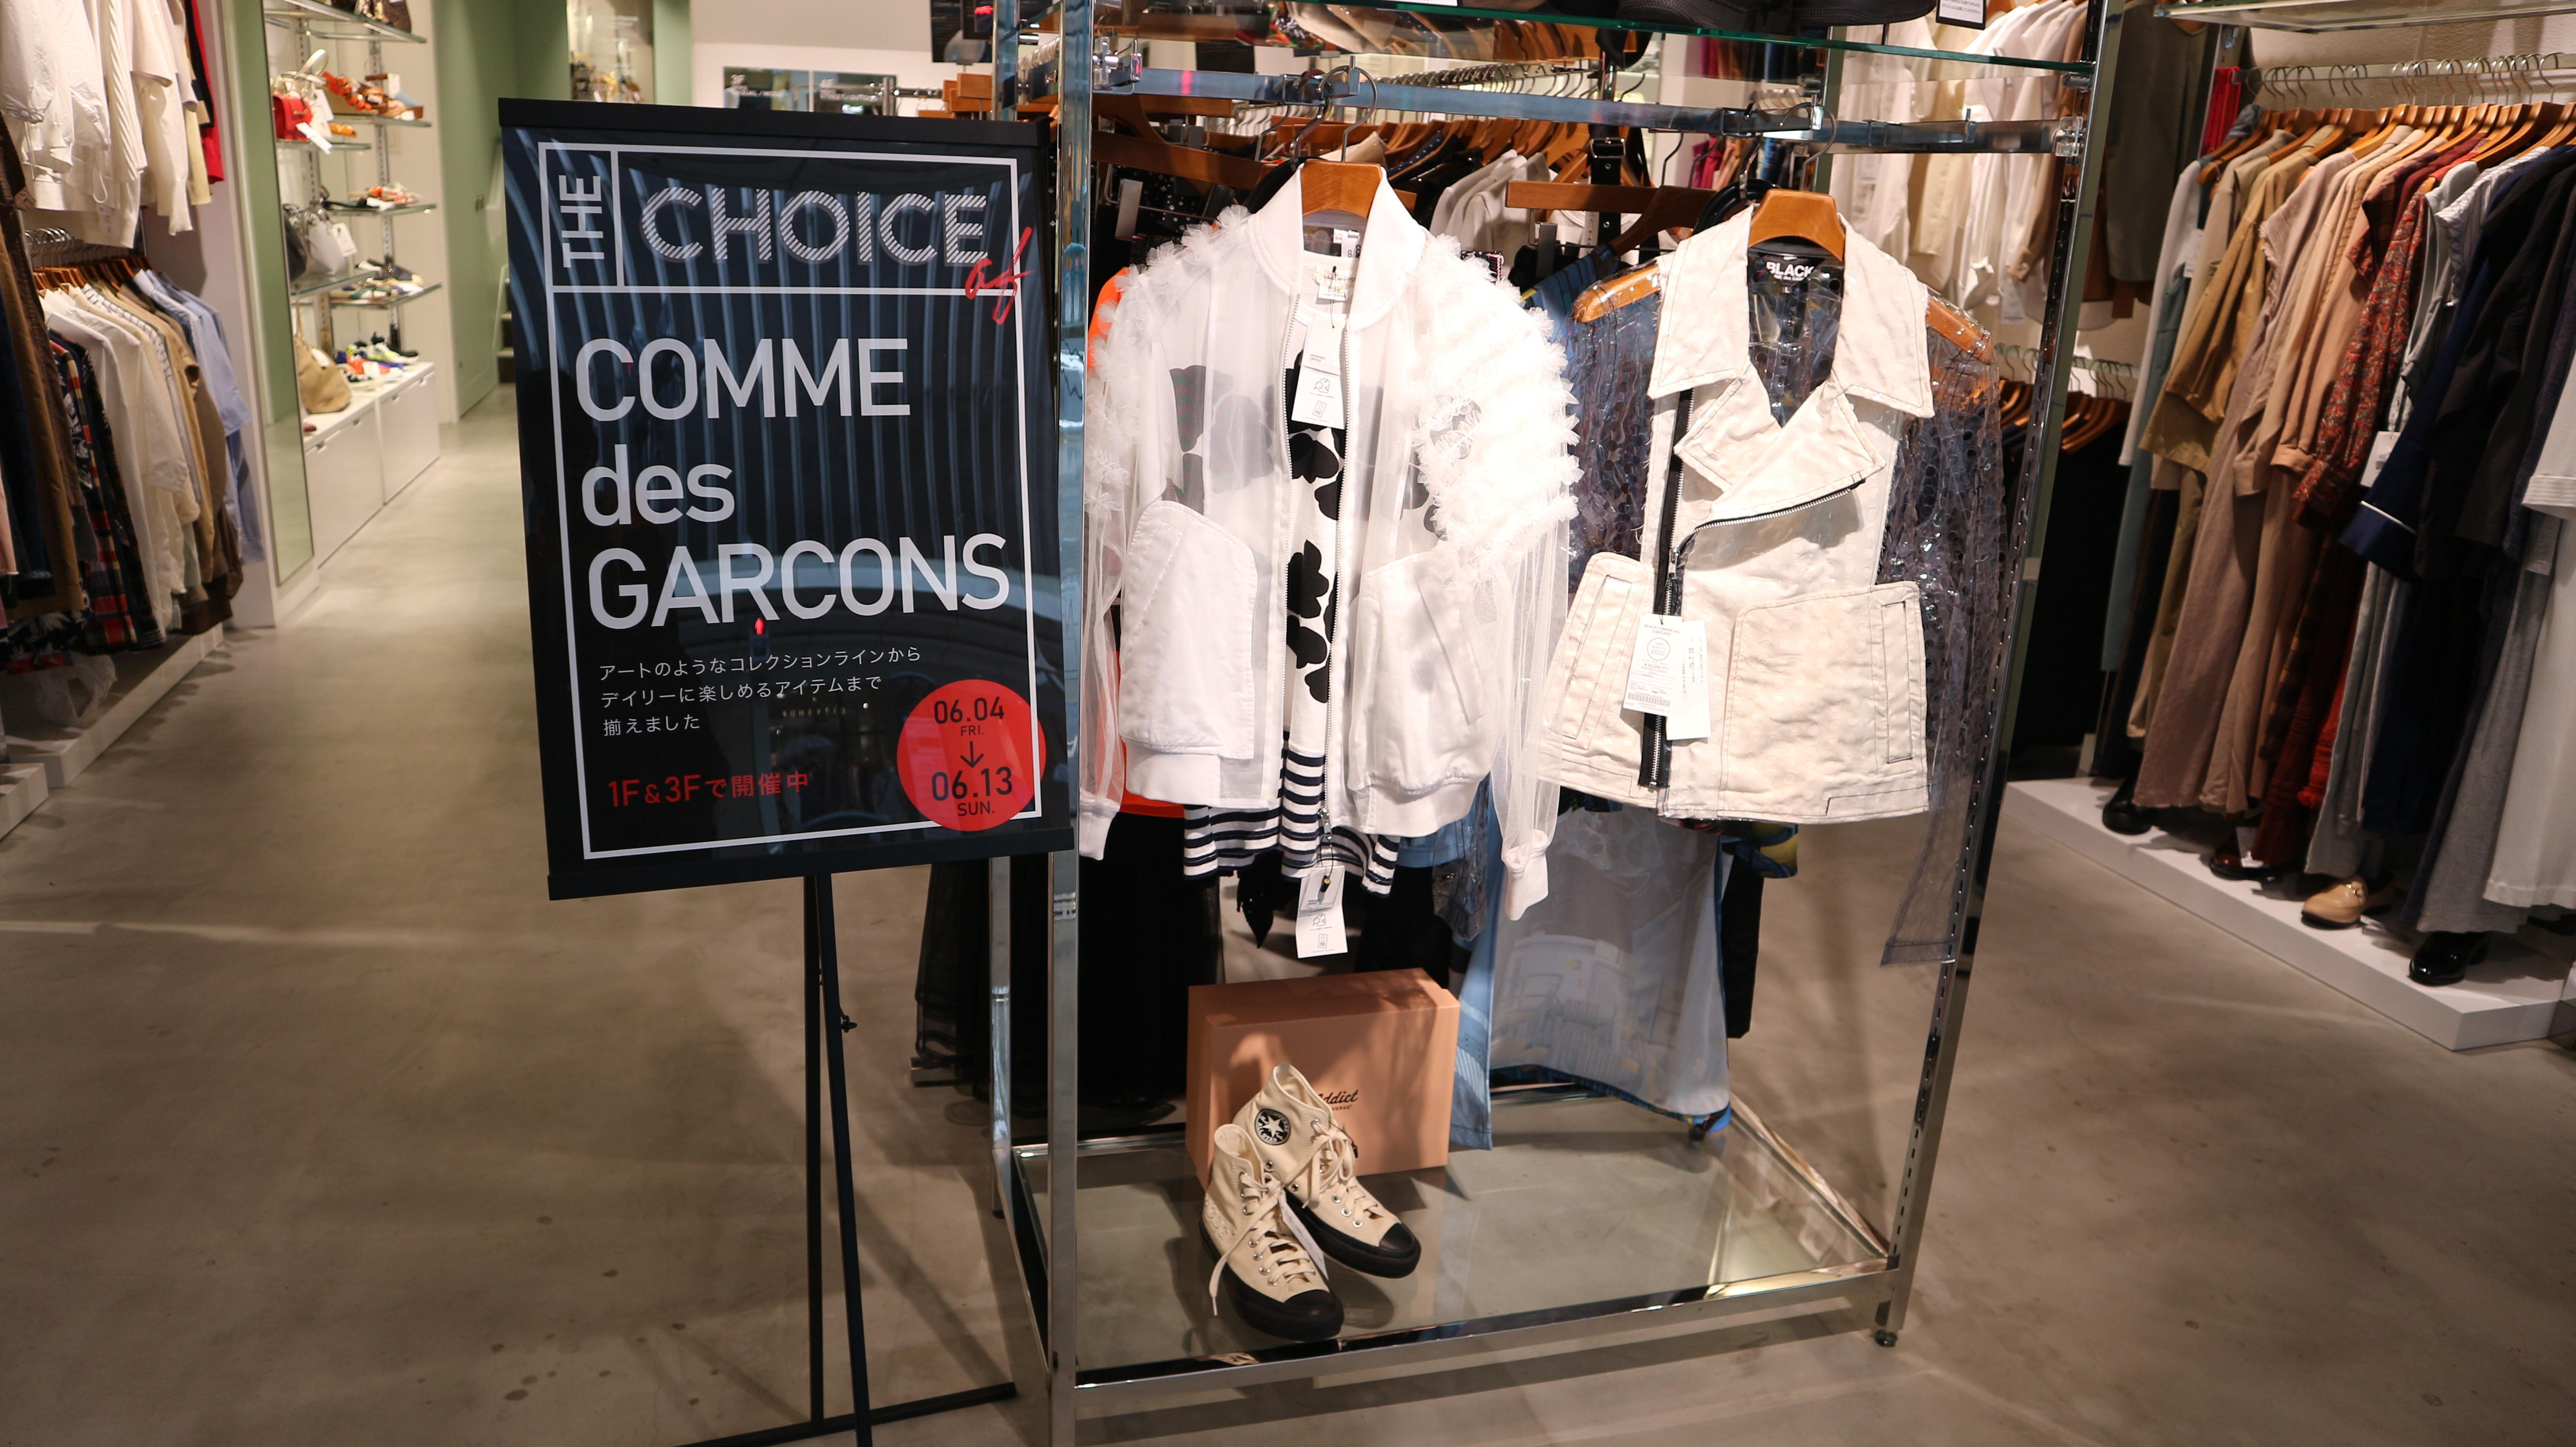 THE CHOICE of COMME des GARCONS 】開催中です｜【公式】ブランド古着